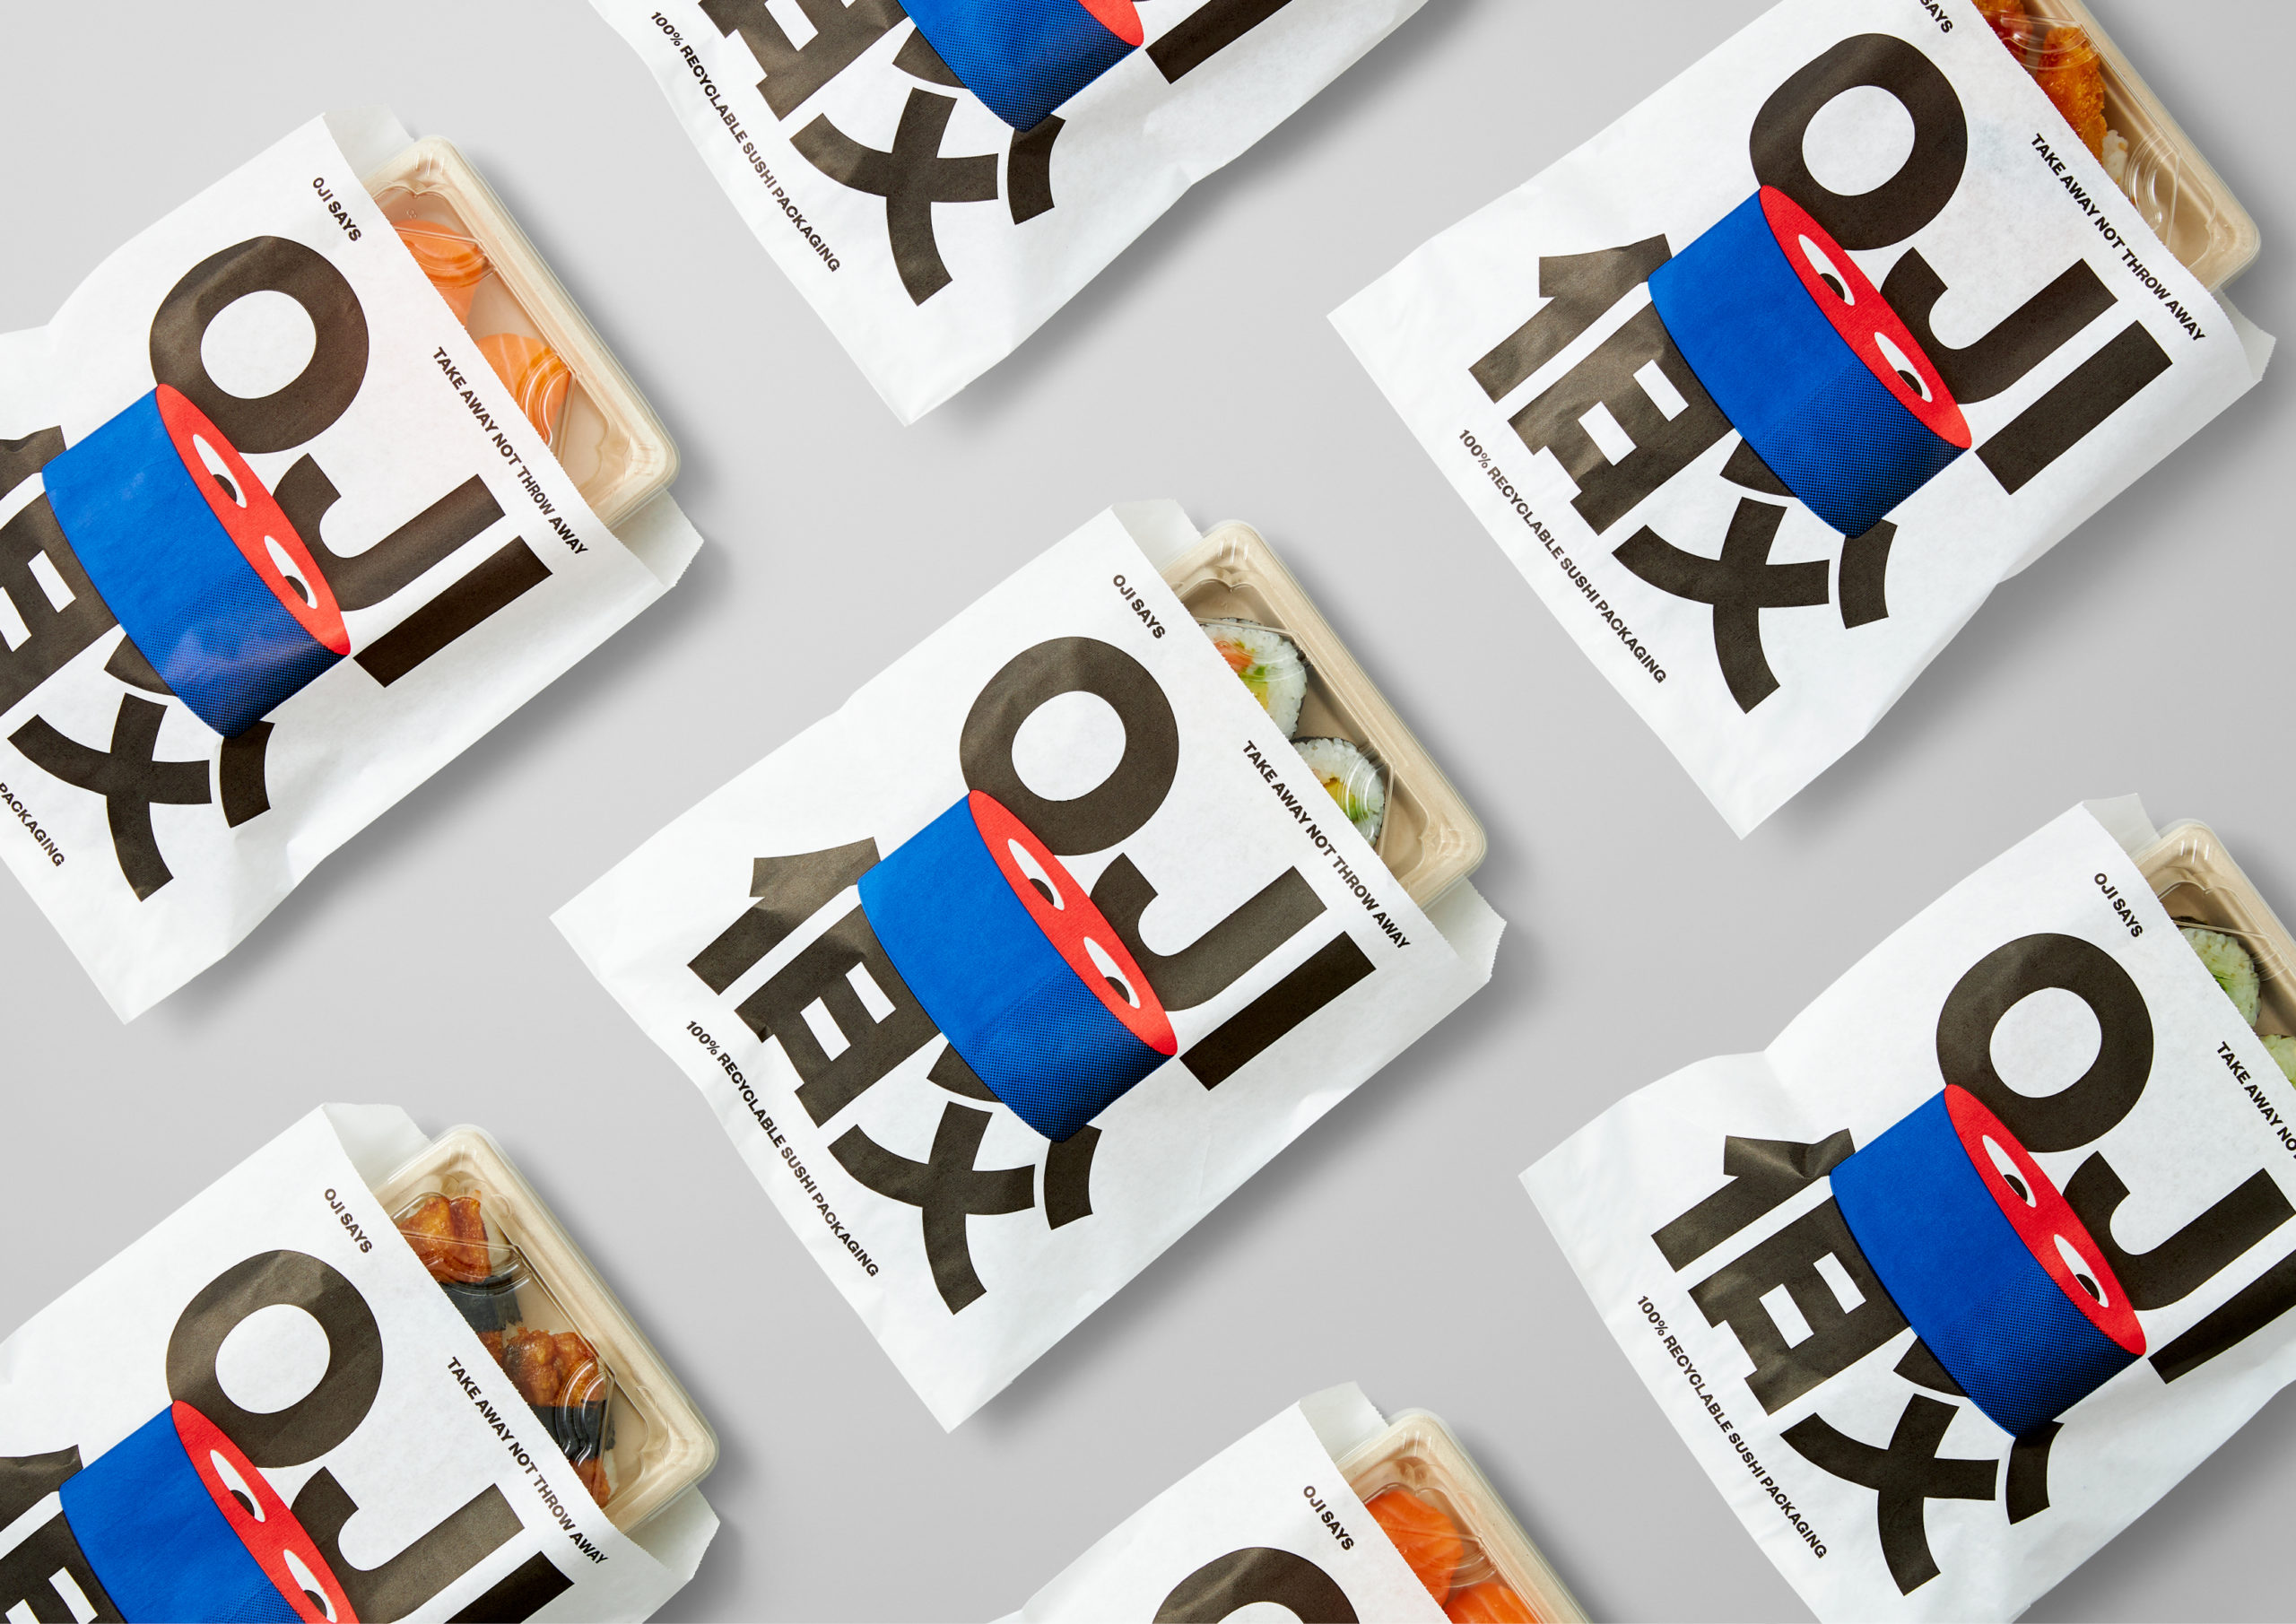 Logo, packaging, menus, signage and motion graphics by Seachange for Auckland-based Oji Sushi